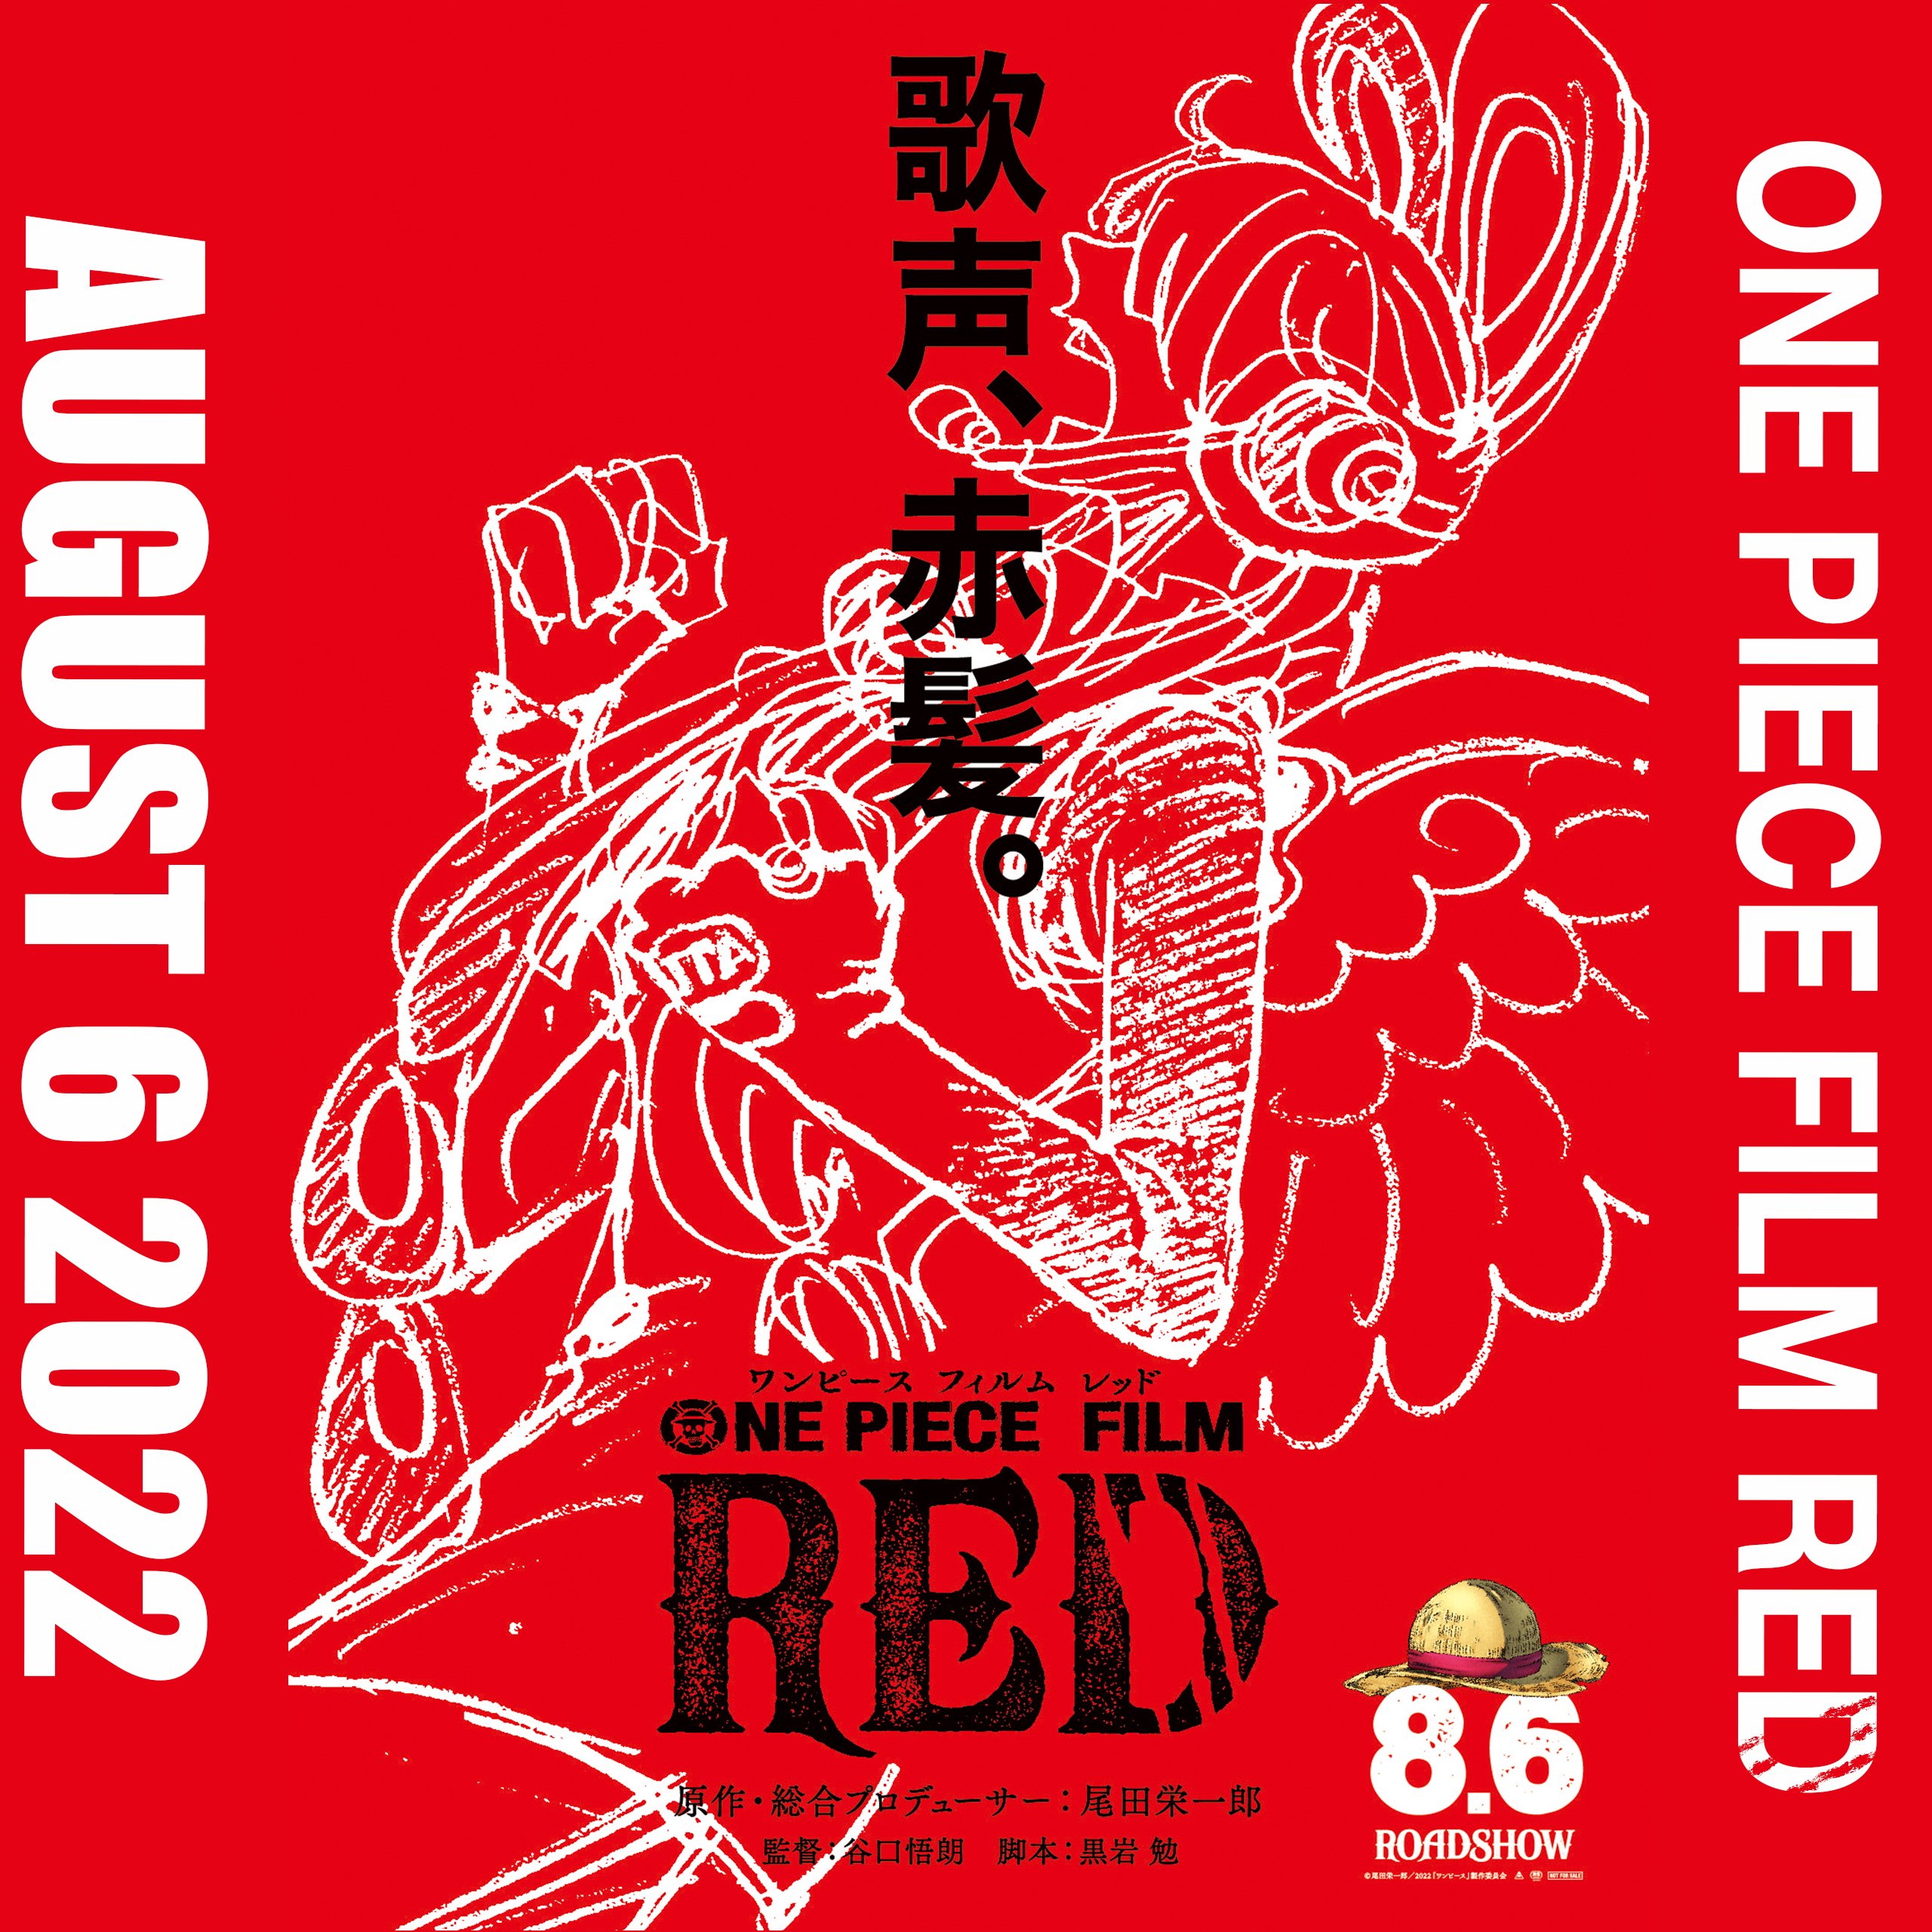 one piece reanimated we are red film visual